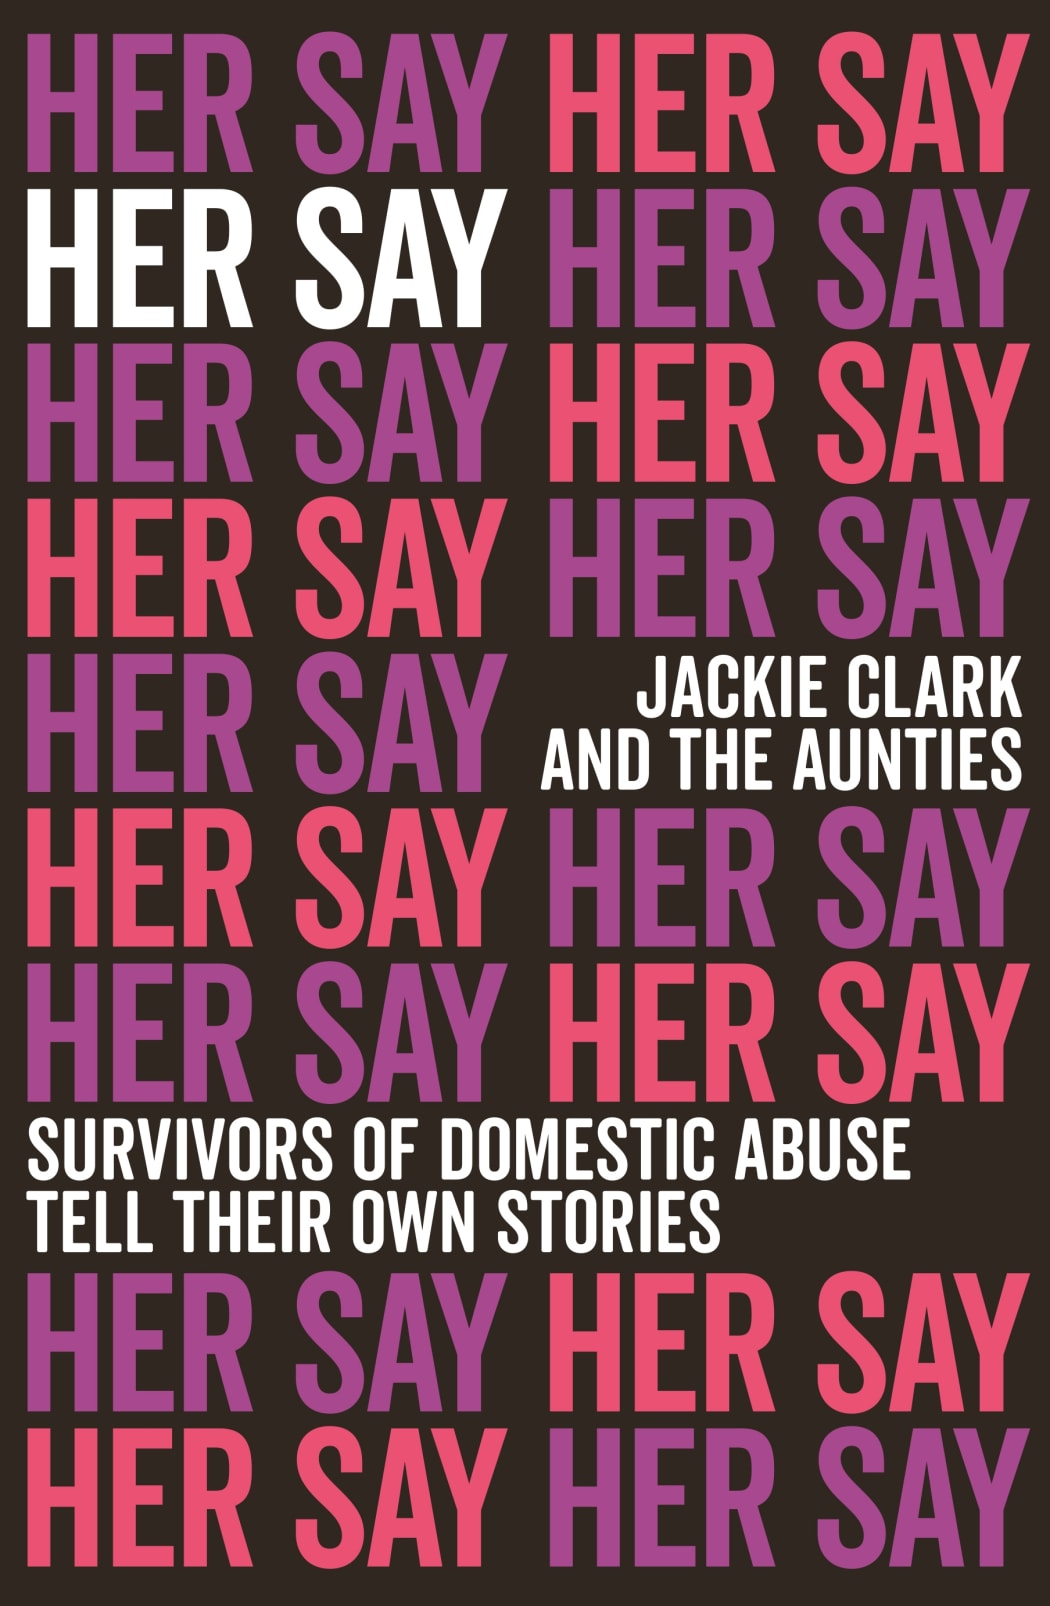 Cover of the book "Her Say" by Jackie Clark and the Aunties